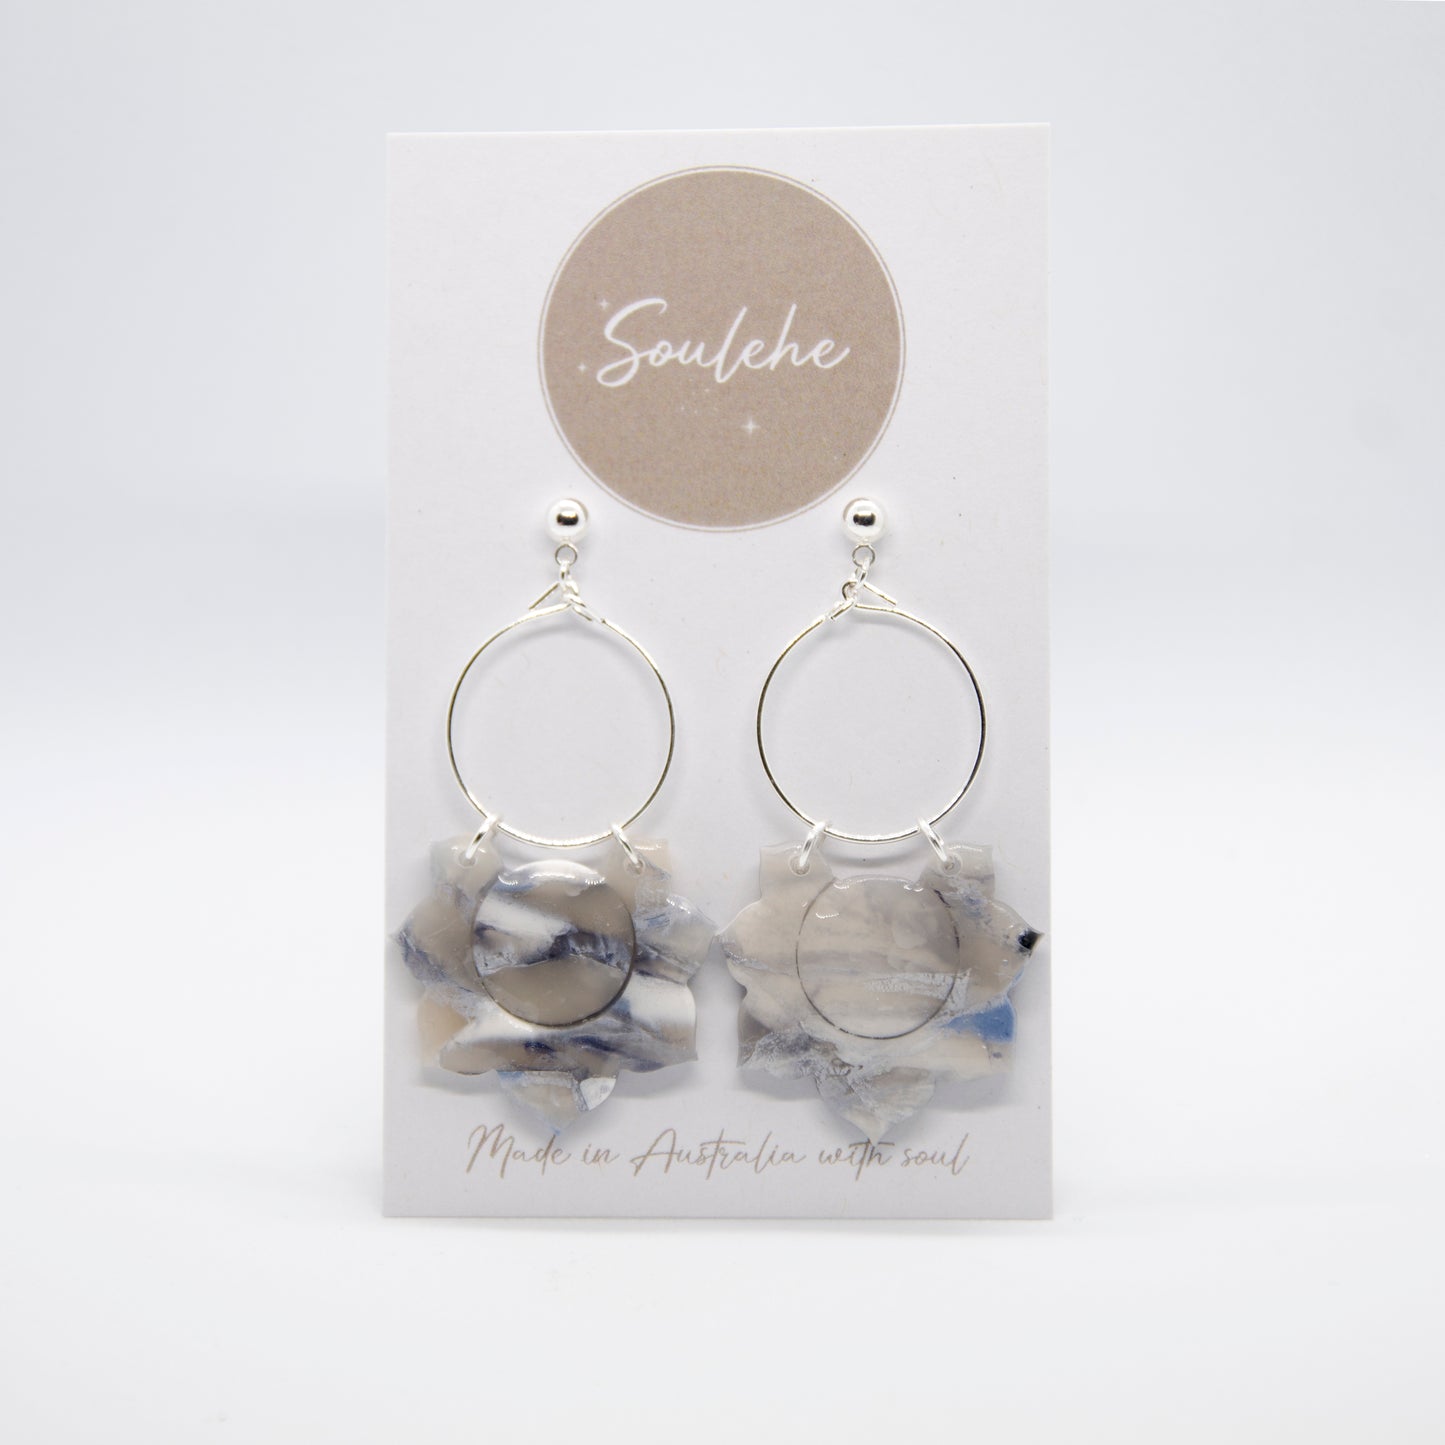 Glaucous • Earrings • Polymer Clay & 925 Silver